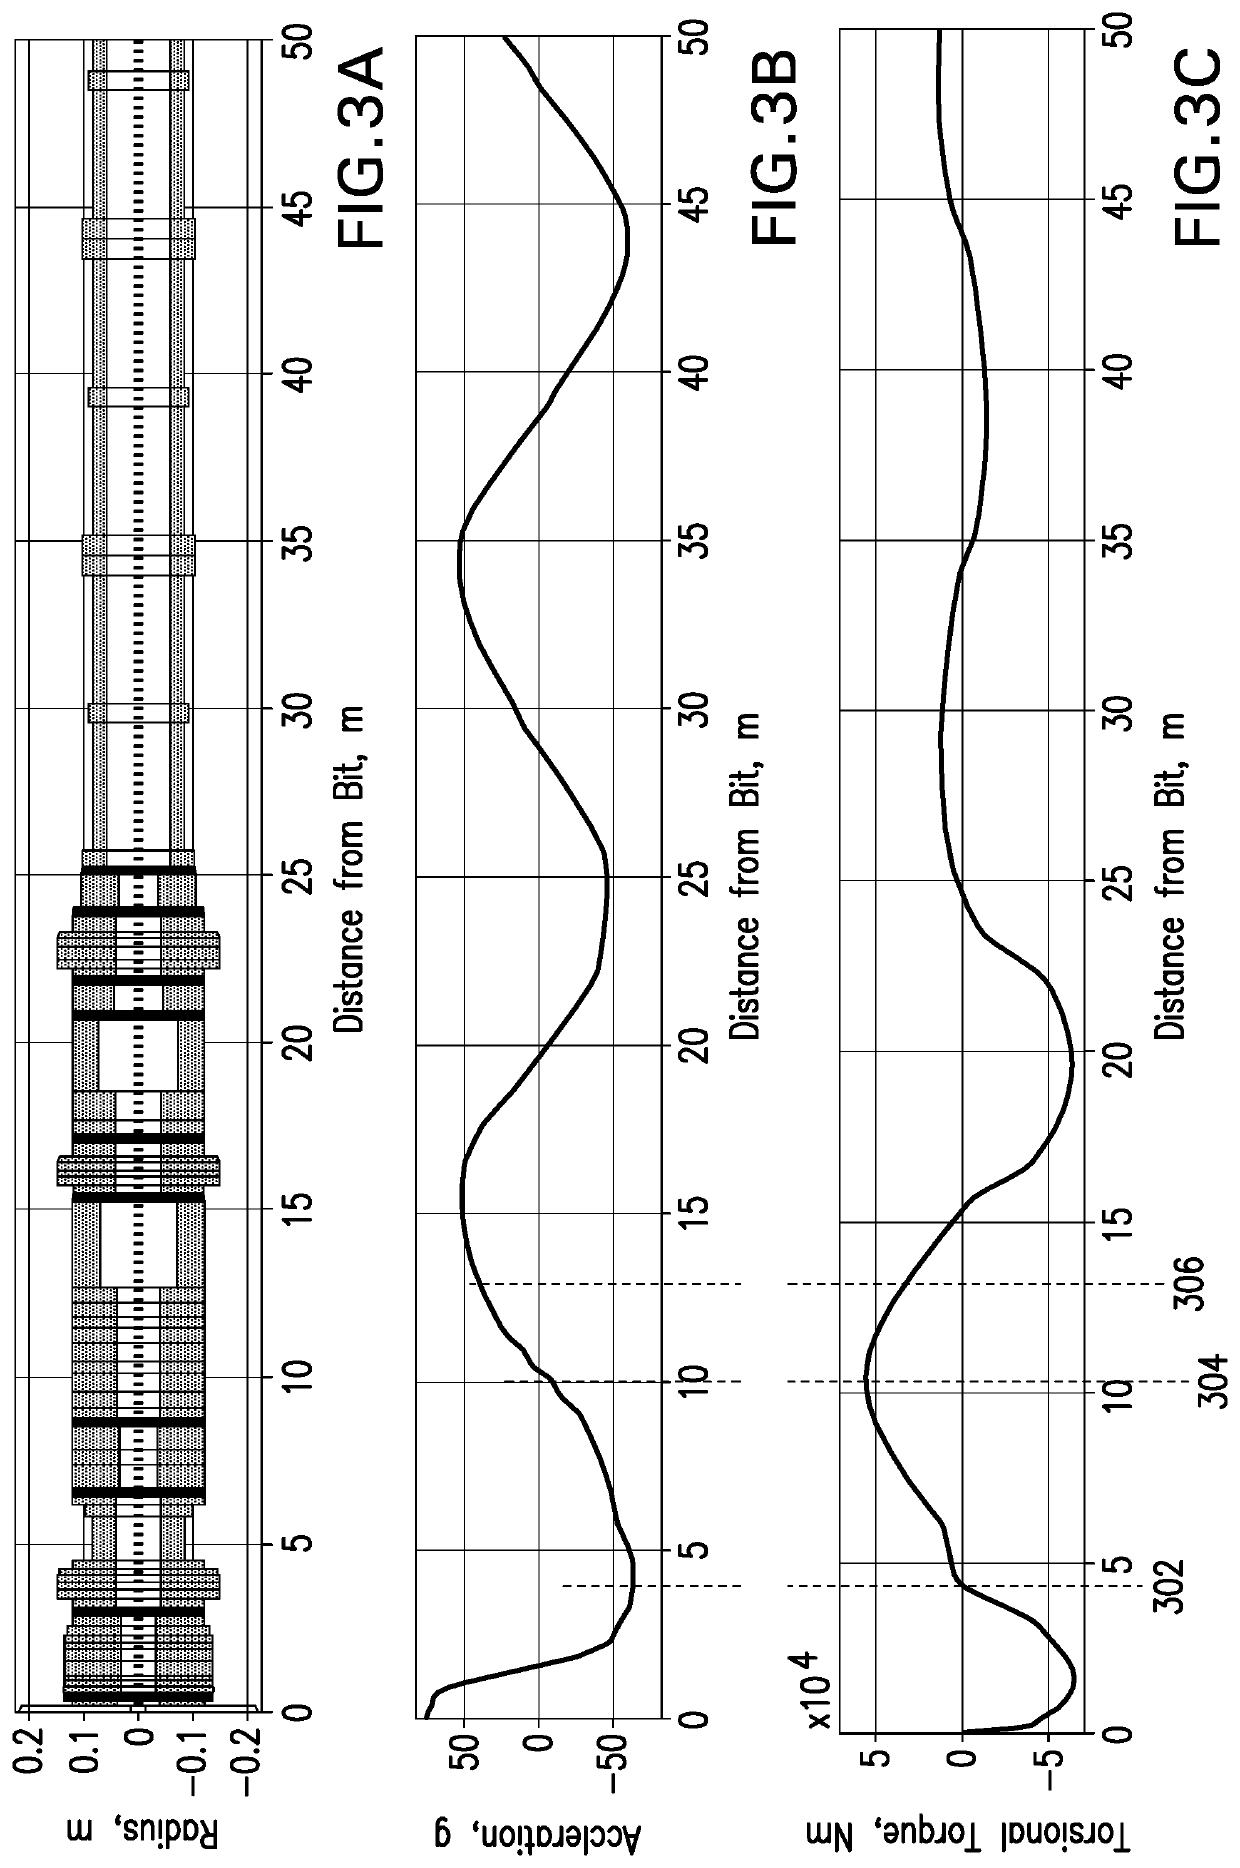 Estimation of maximum load amplitudes in drilling systems independent of sensor position